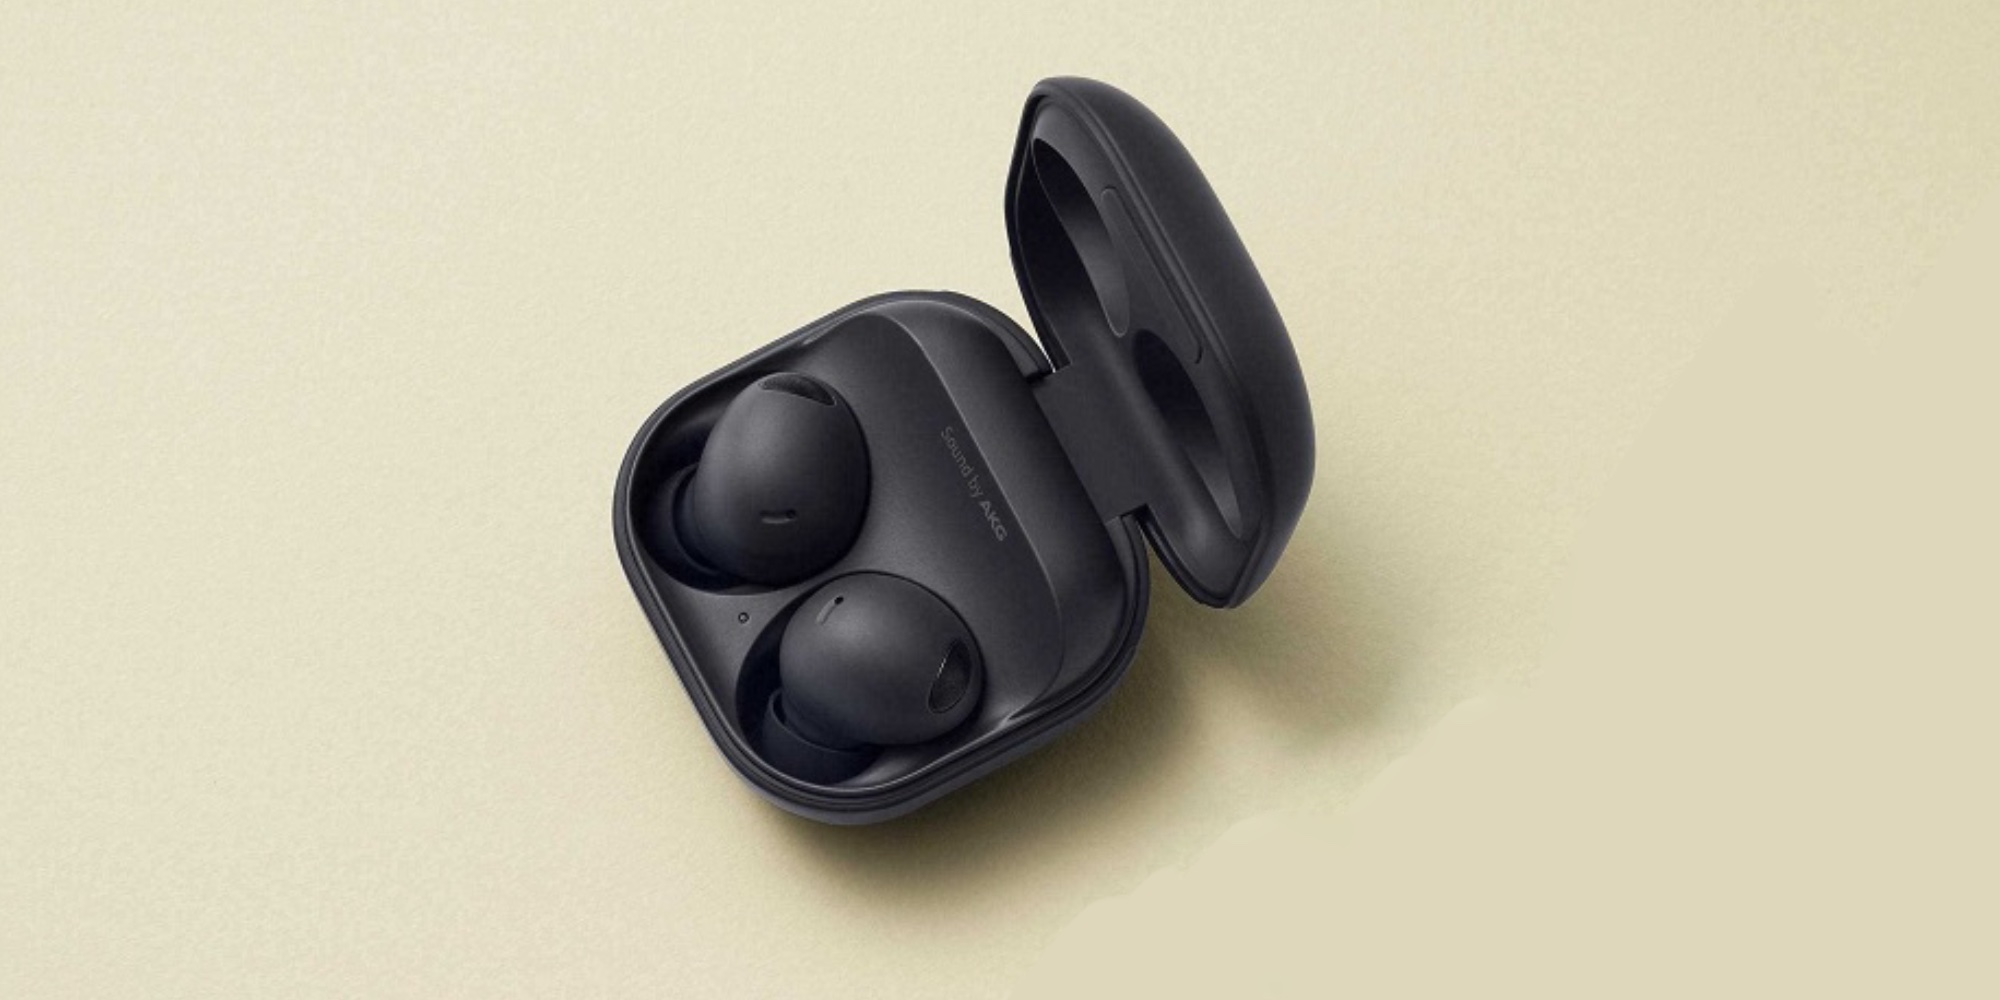 Best price of the year takes $60 off Samsung's Galaxy Buds 2 Pro at $170